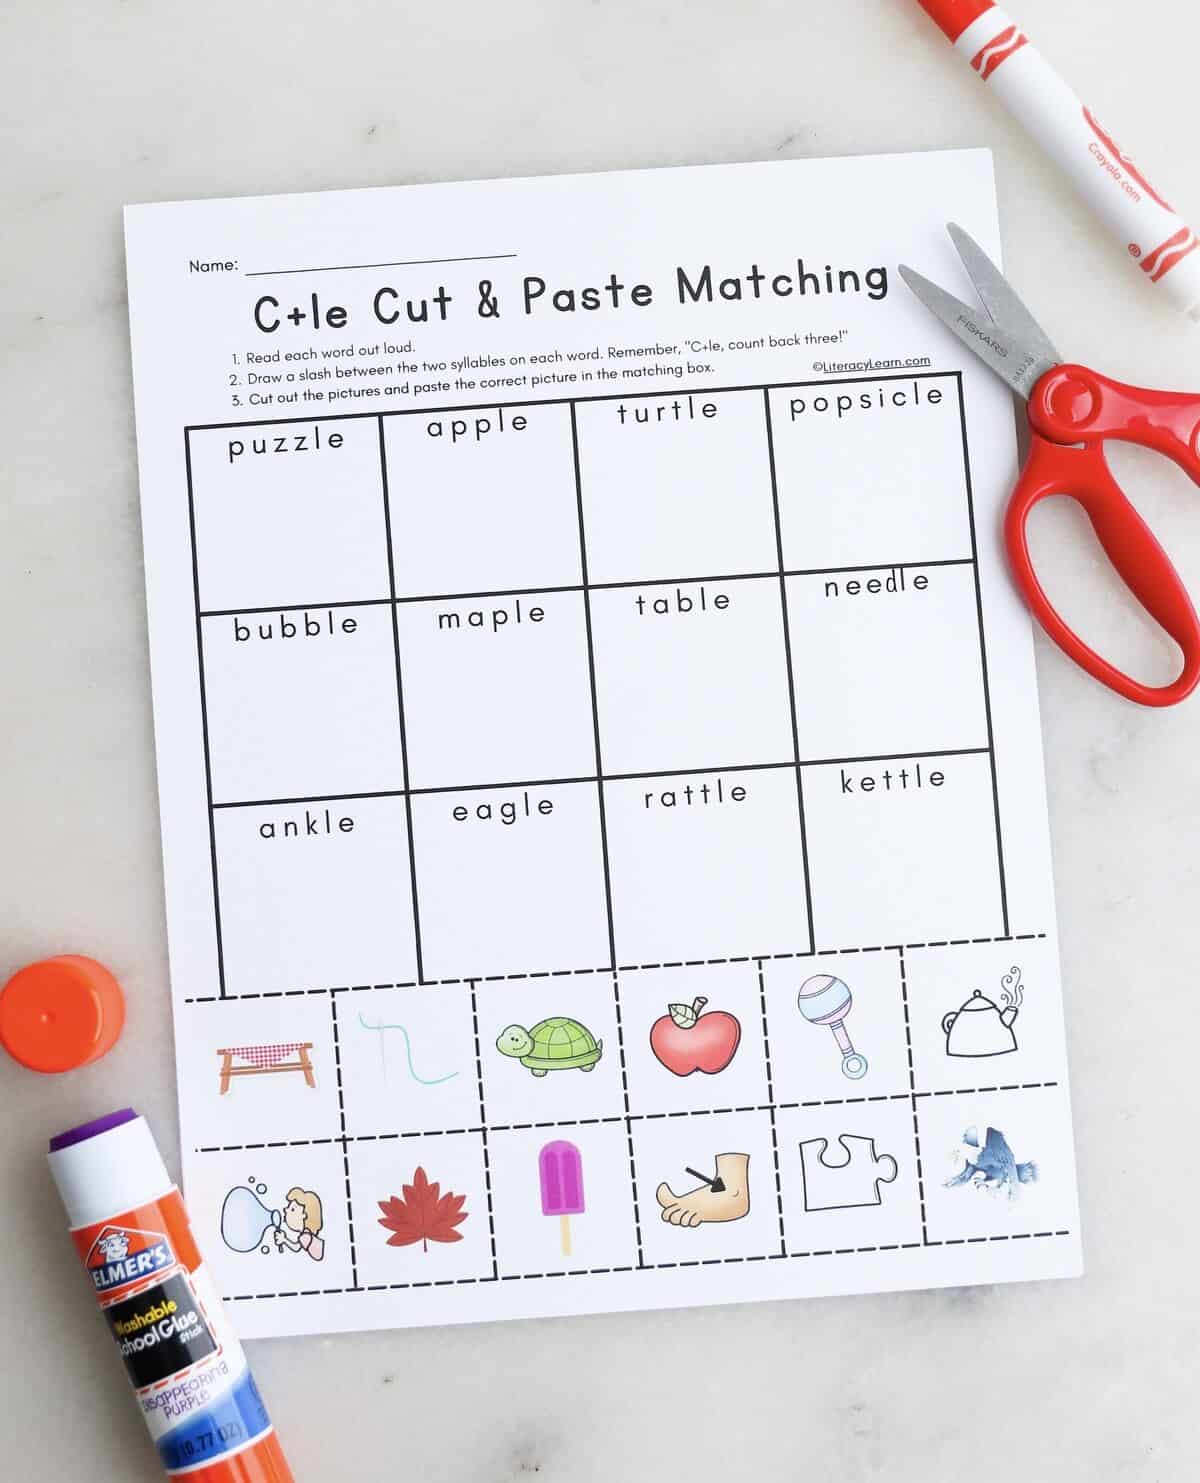 A printed C+le picture match worksheet with a scissor and glue stick 